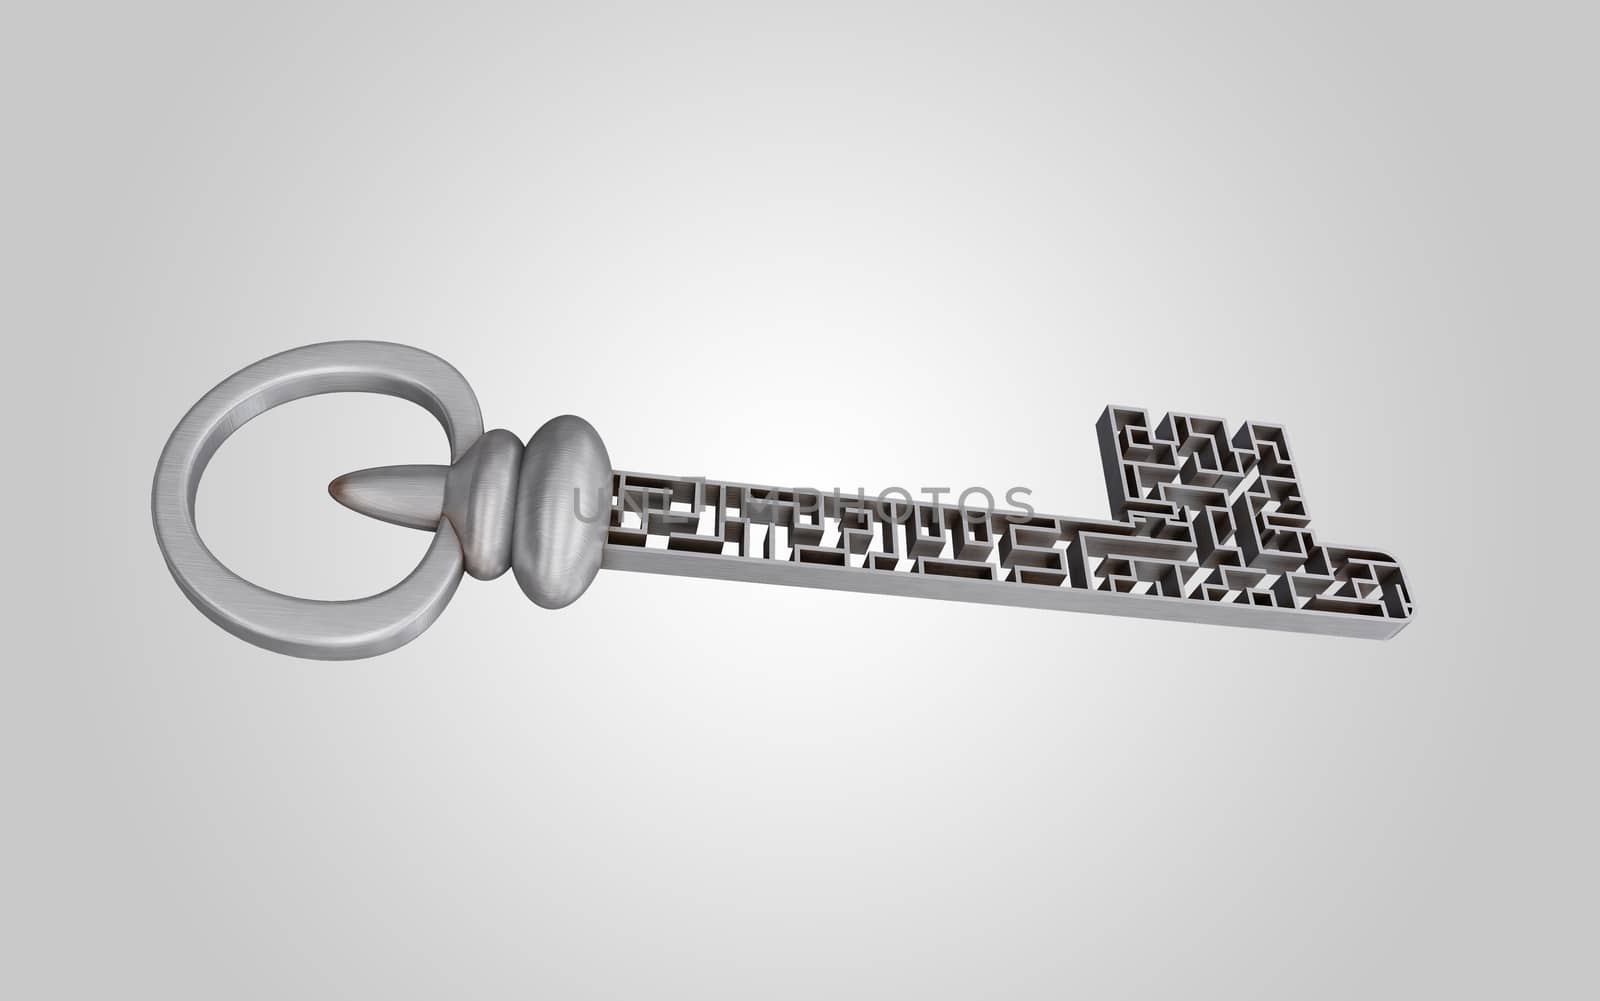 The key is a maze, on a gray gradient background, concept